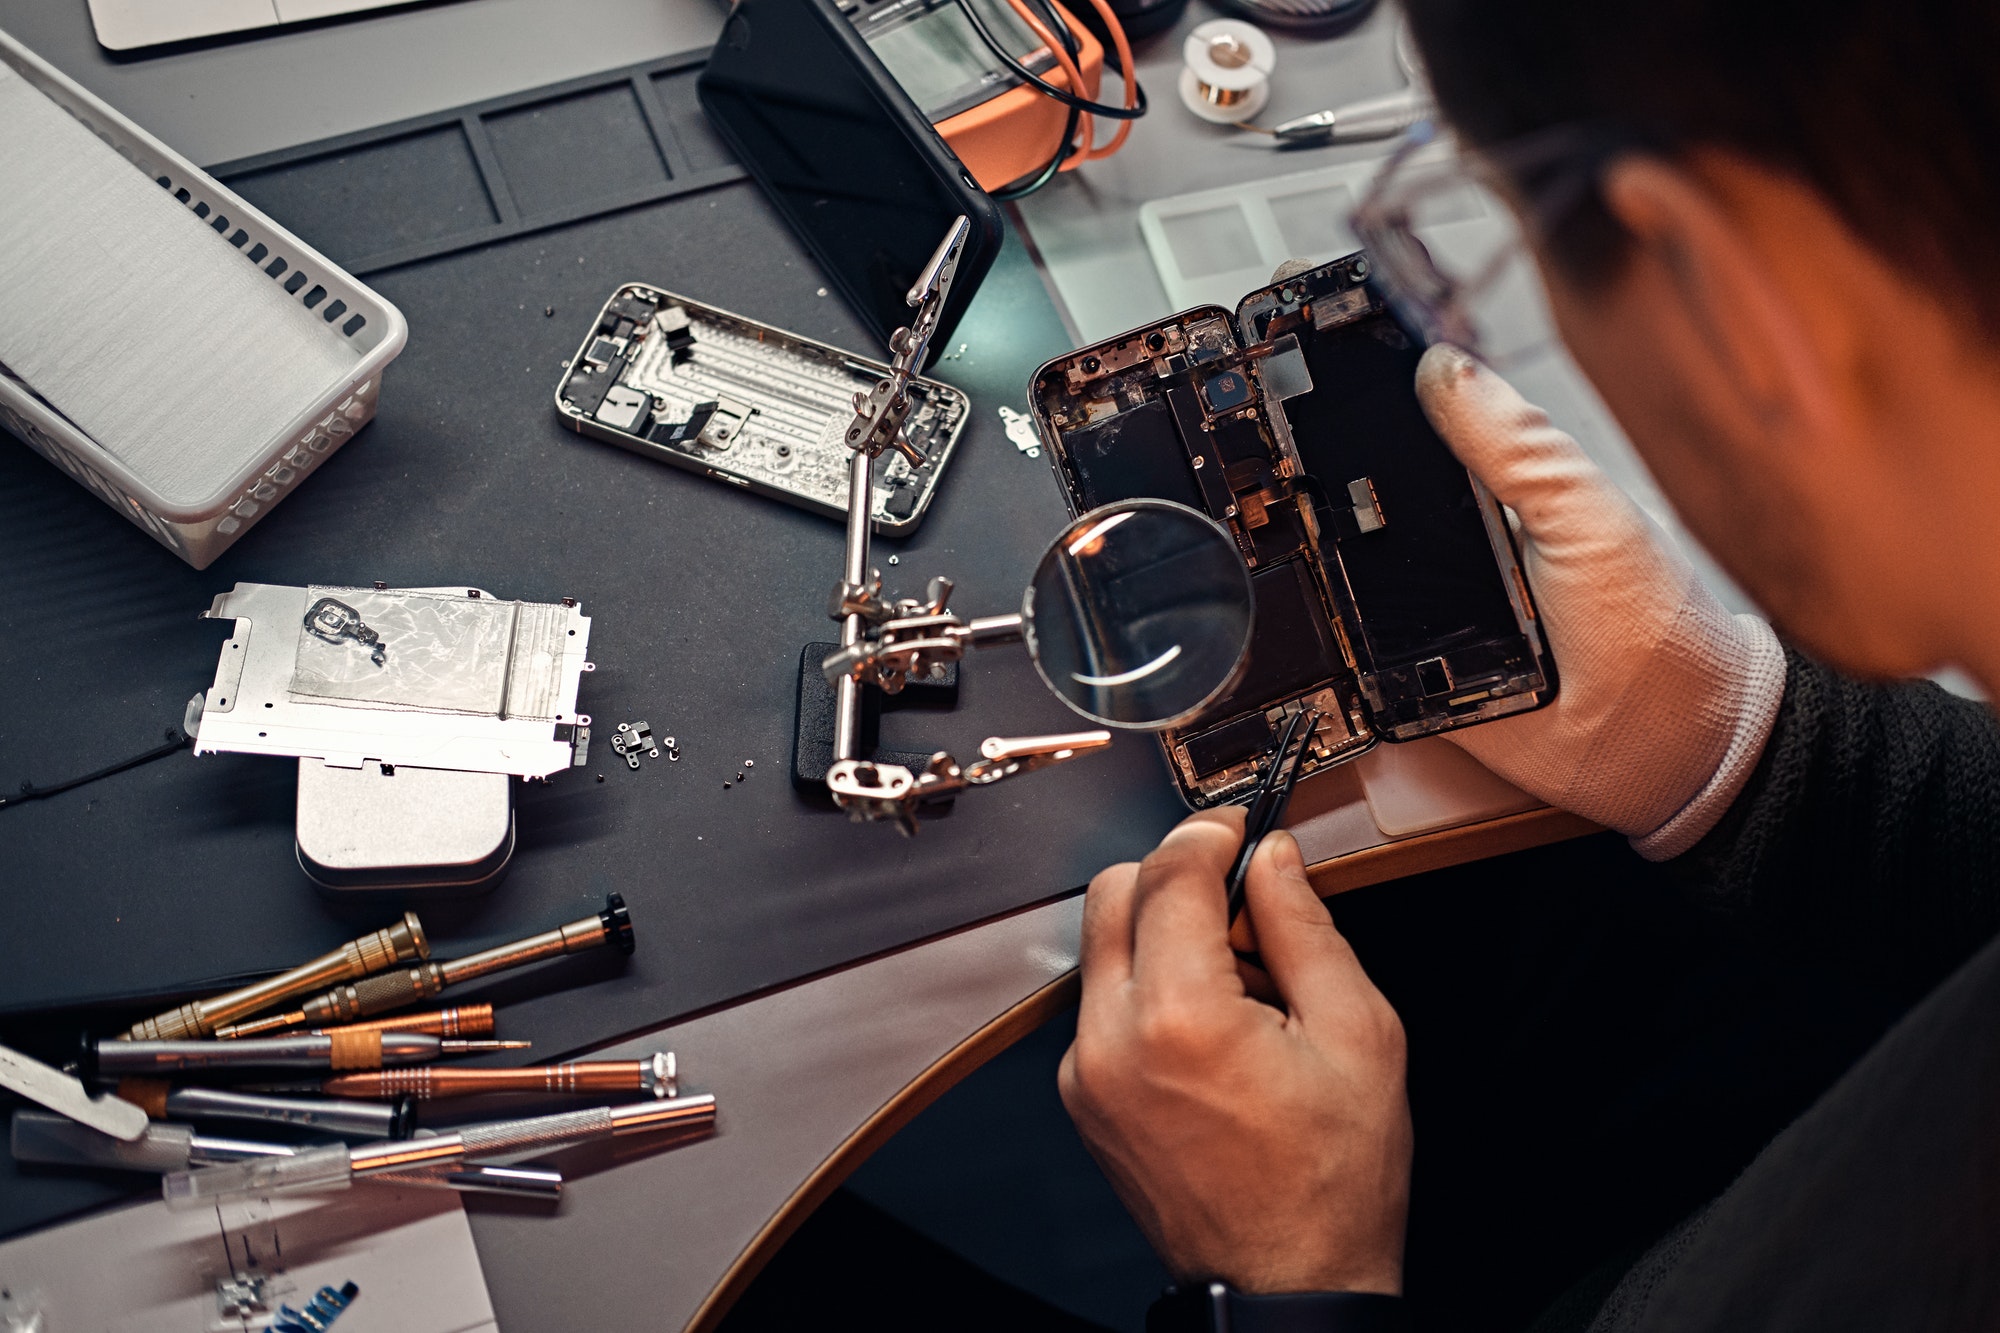 technician-carefully-inspect-the-internal-parts-of-the-smartphone-in-a-modern-repair-shop.jpg